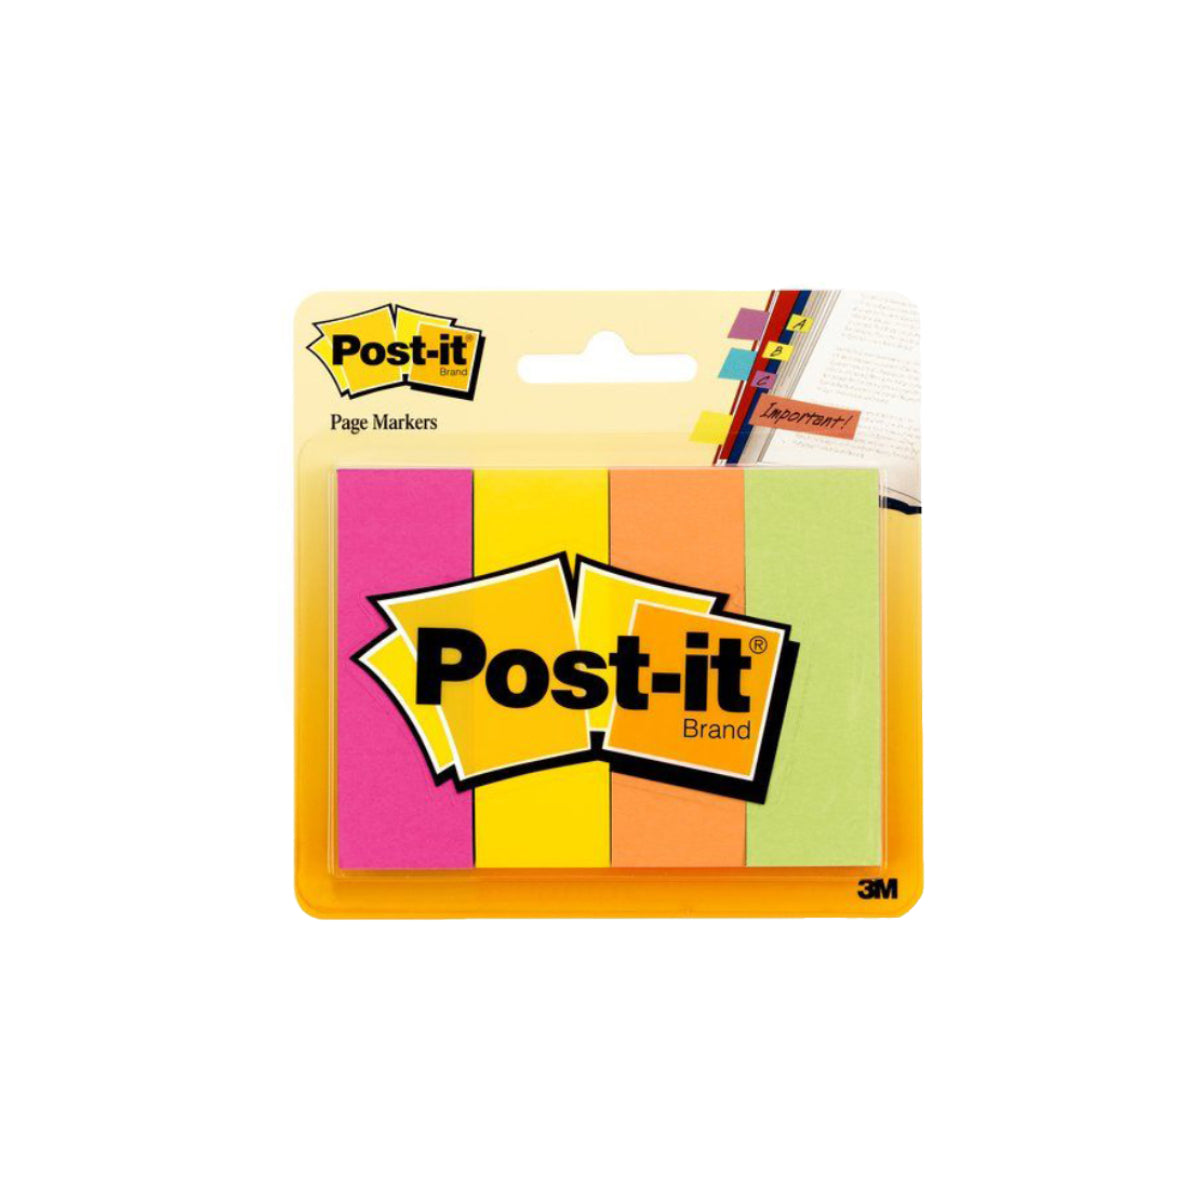 3M Post-it Page Markers 671-4AF, 4pads/pack, Assorted Fluorescent Colors